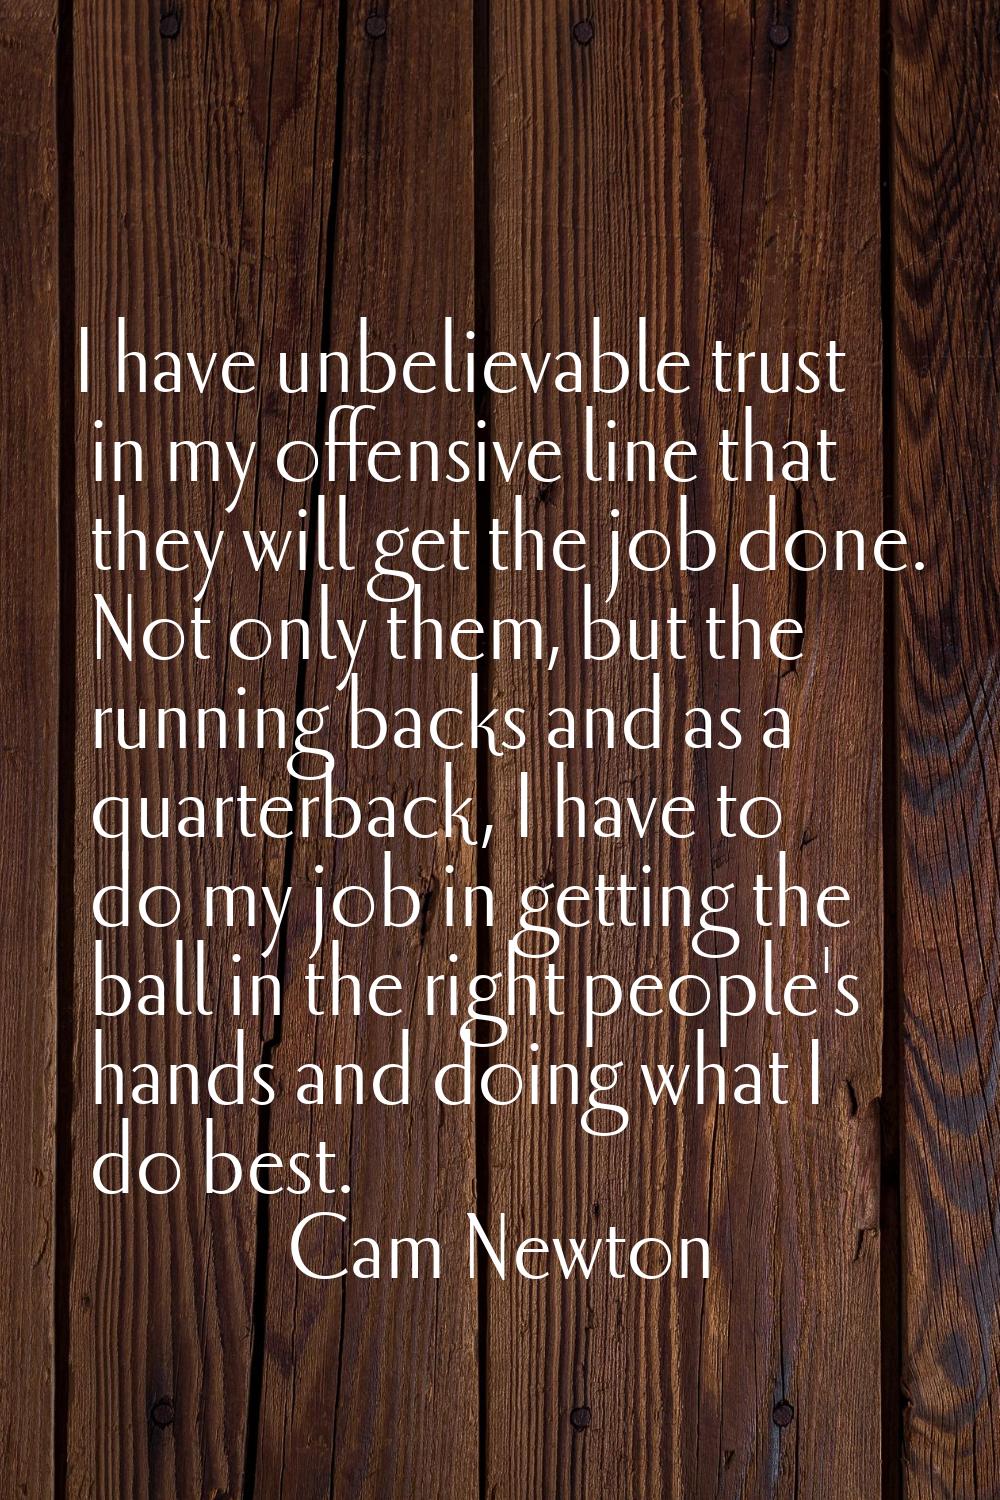 I have unbelievable trust in my offensive line that they will get the job done. Not only them, but 